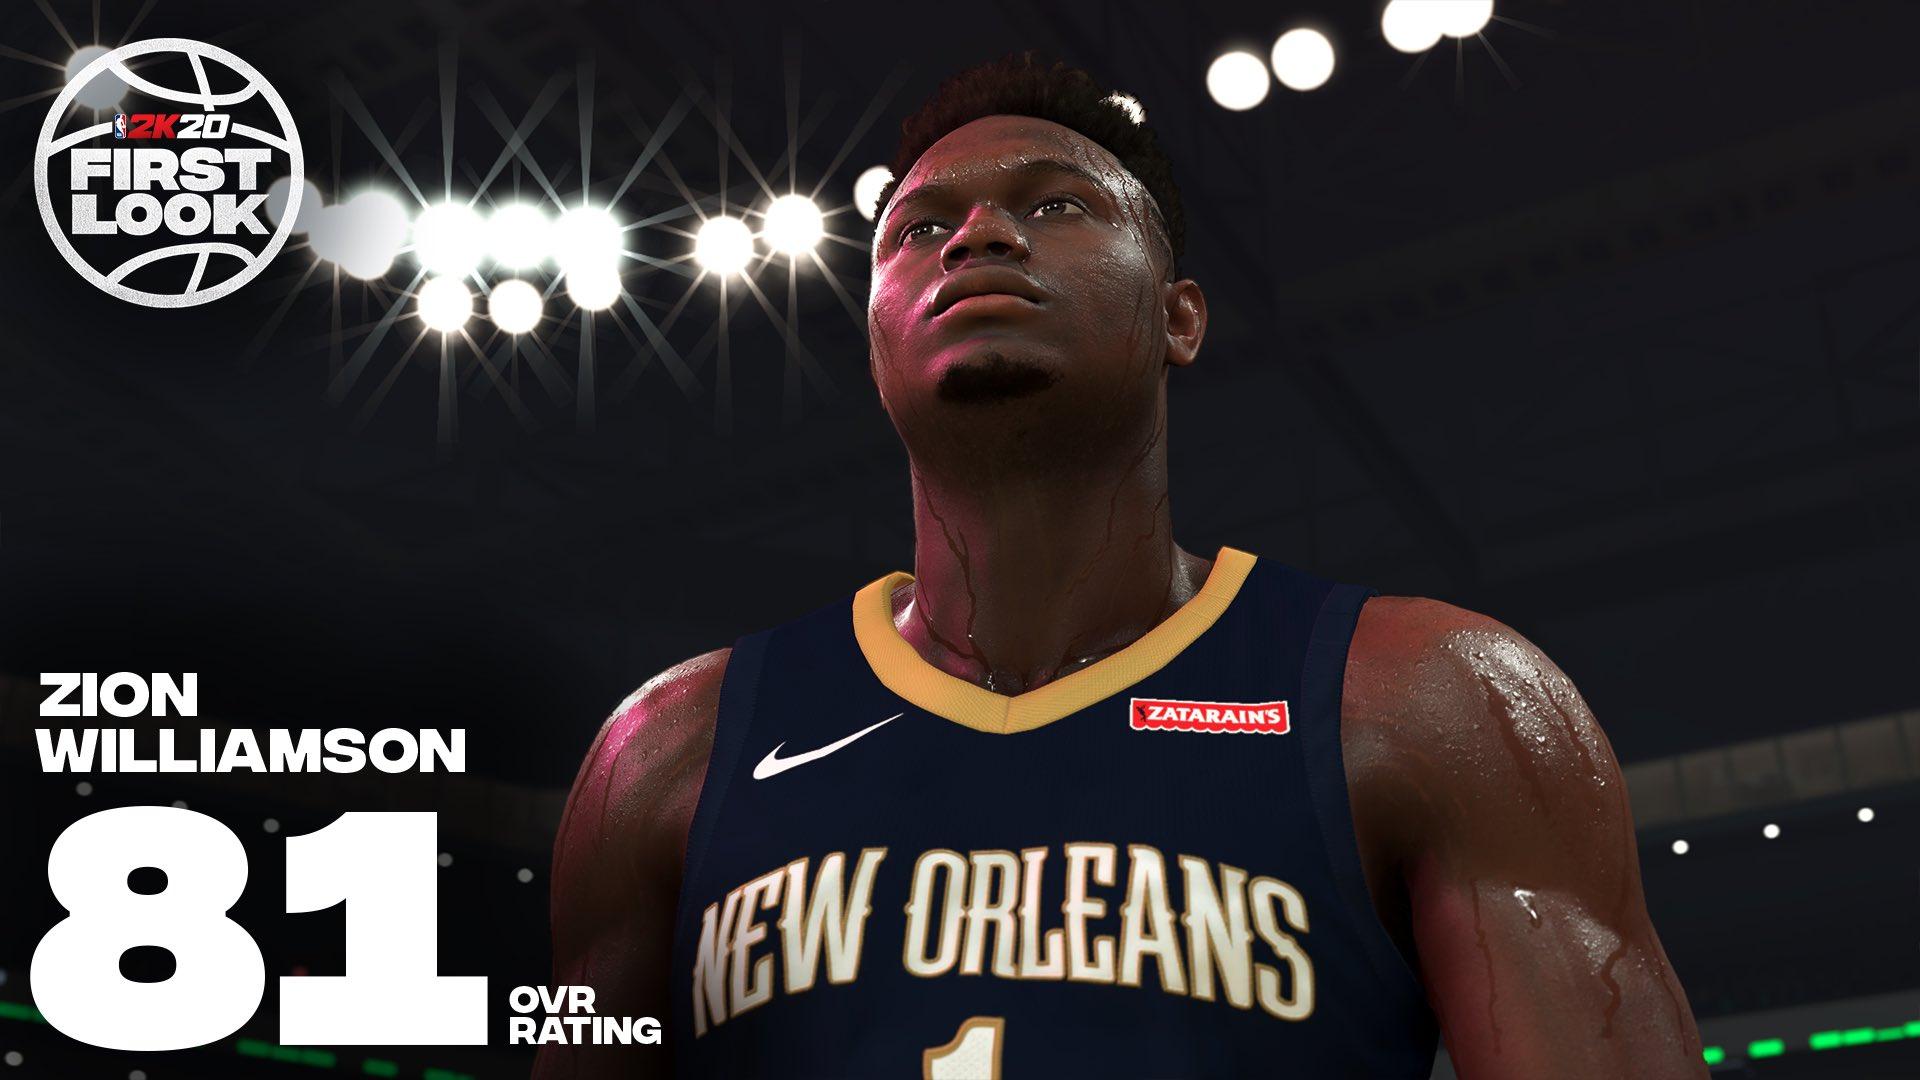 Zion Williamson signs with 2K, adding to whirlwind summer